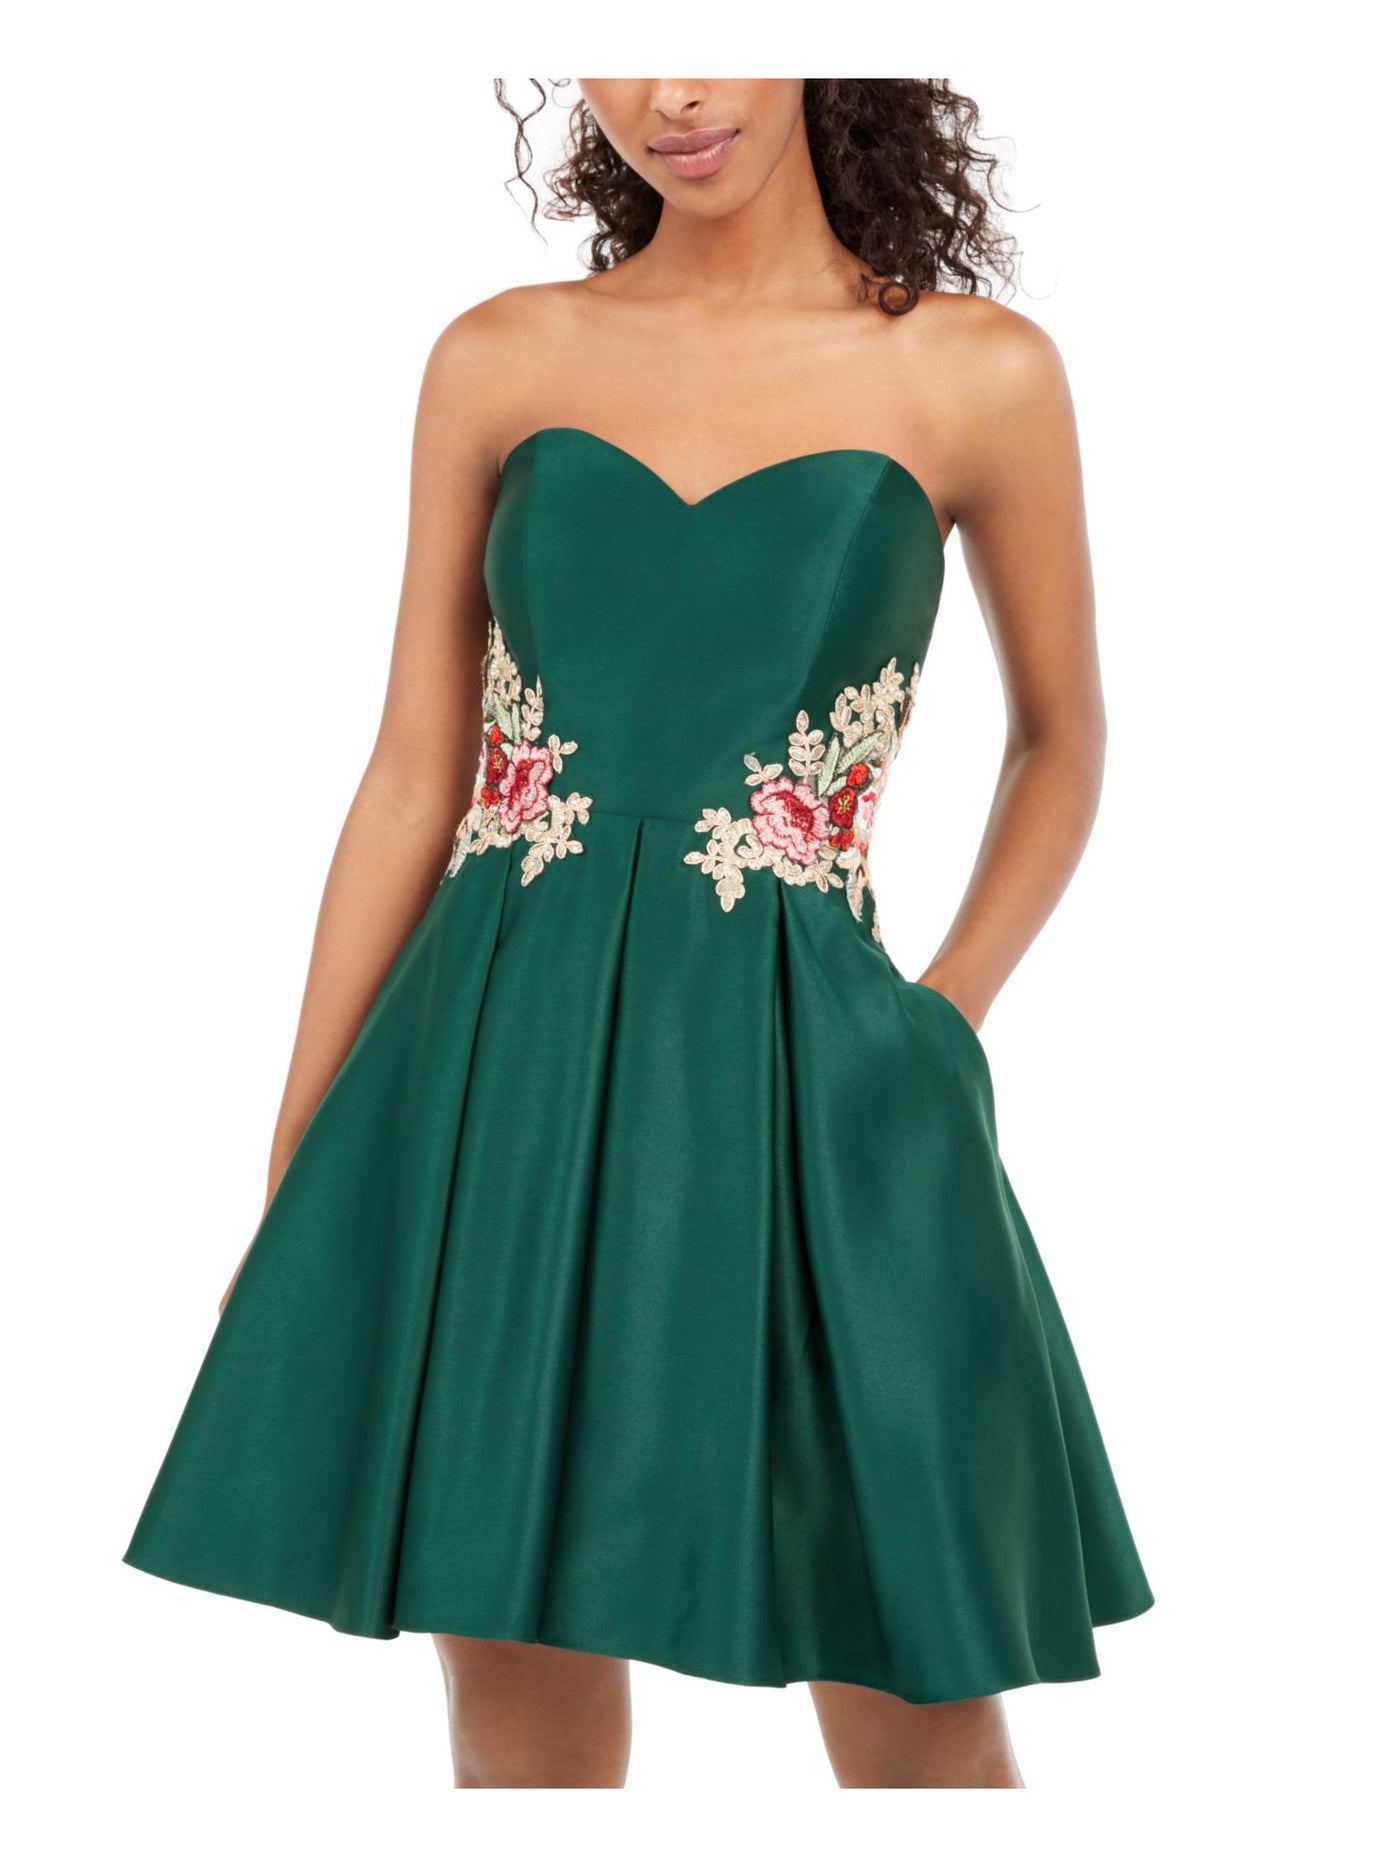 BLONDIE Womens Green Embellished Floral Sweetheart Neckline Full-Length Party Fit + Flare Dress 3